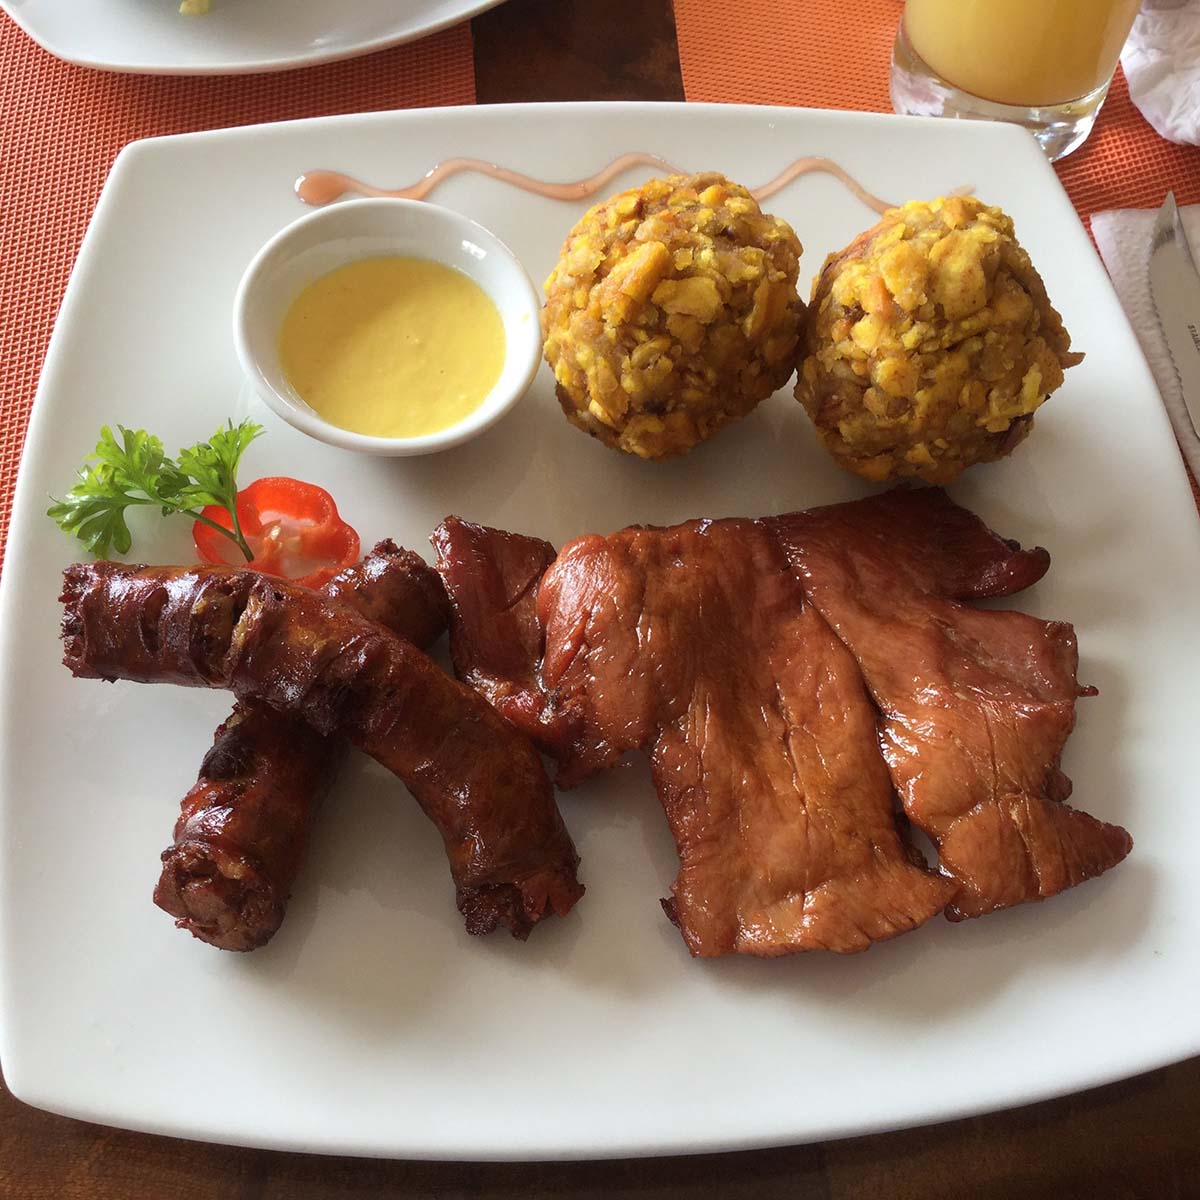 Grilled and marinated meat with balls of fried mashed plantains. Served with sauce and garnish.